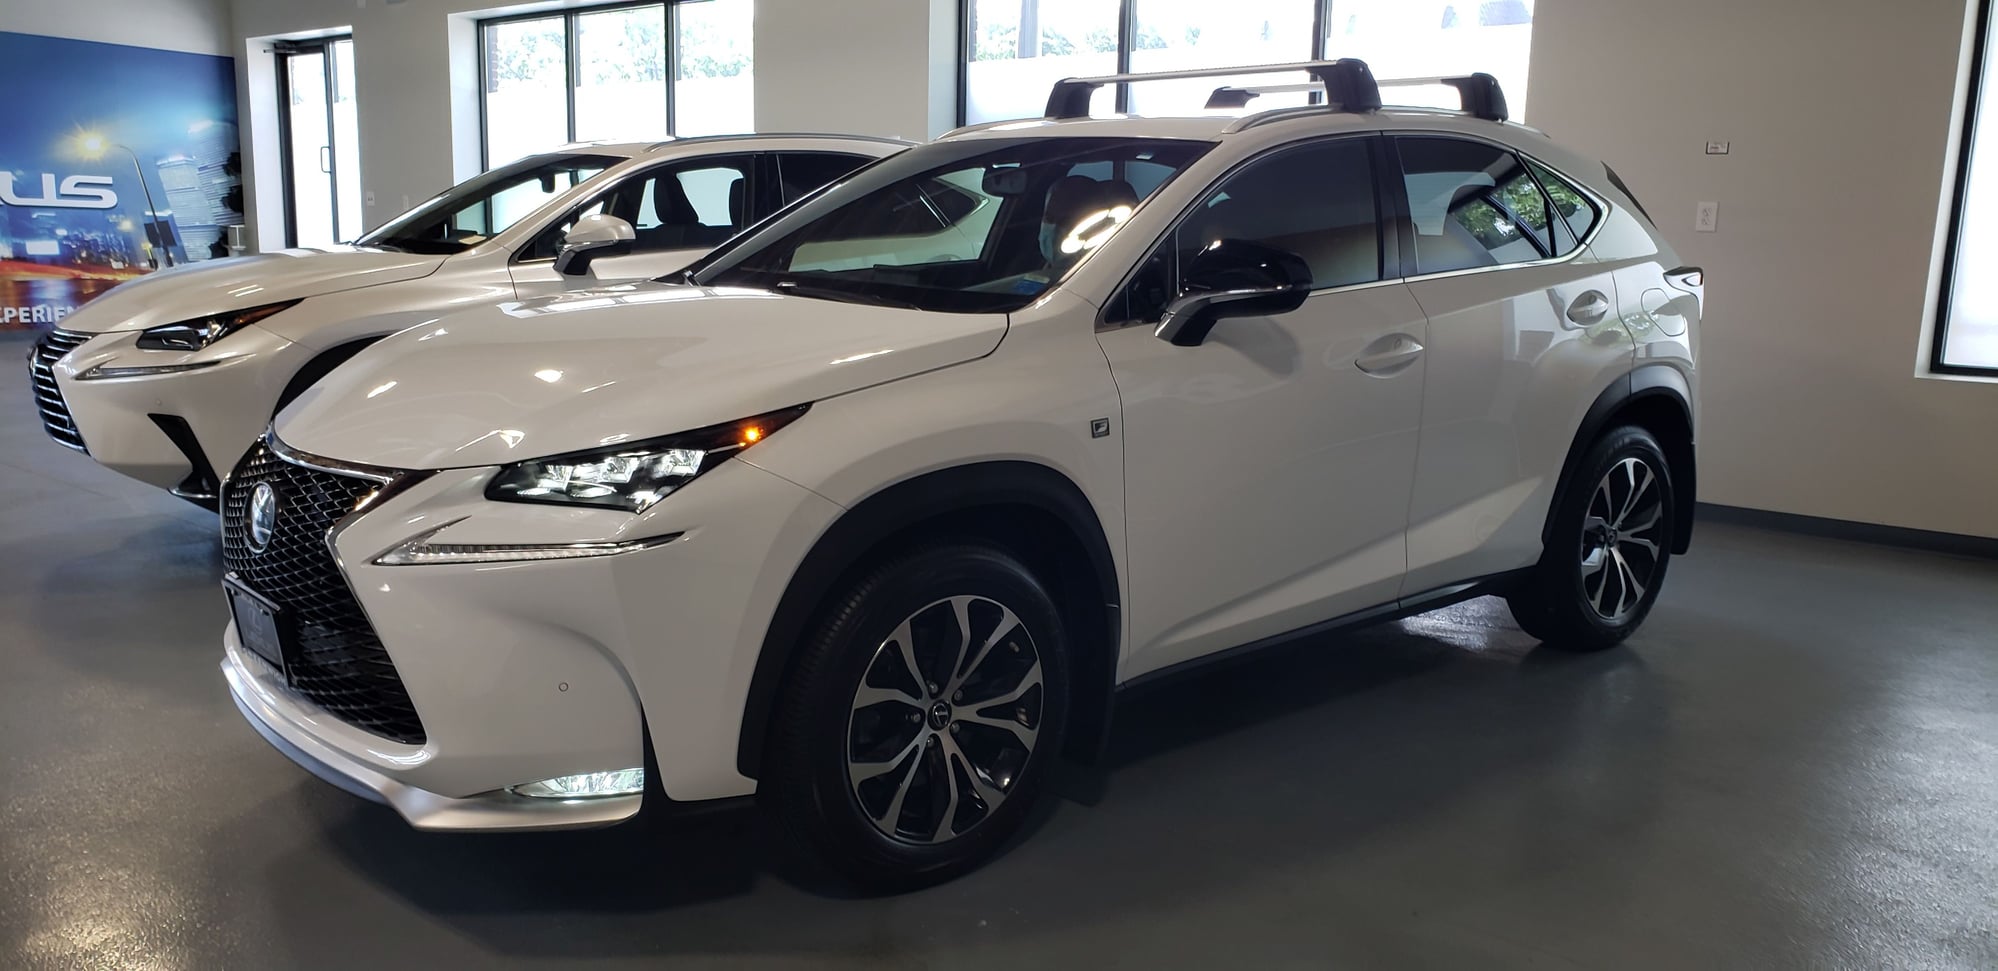 Accessories - Xbars for 2017 or similar - Used - 2015 to 2018 Lexus NX200t - East Meadow, NY 11554, United States